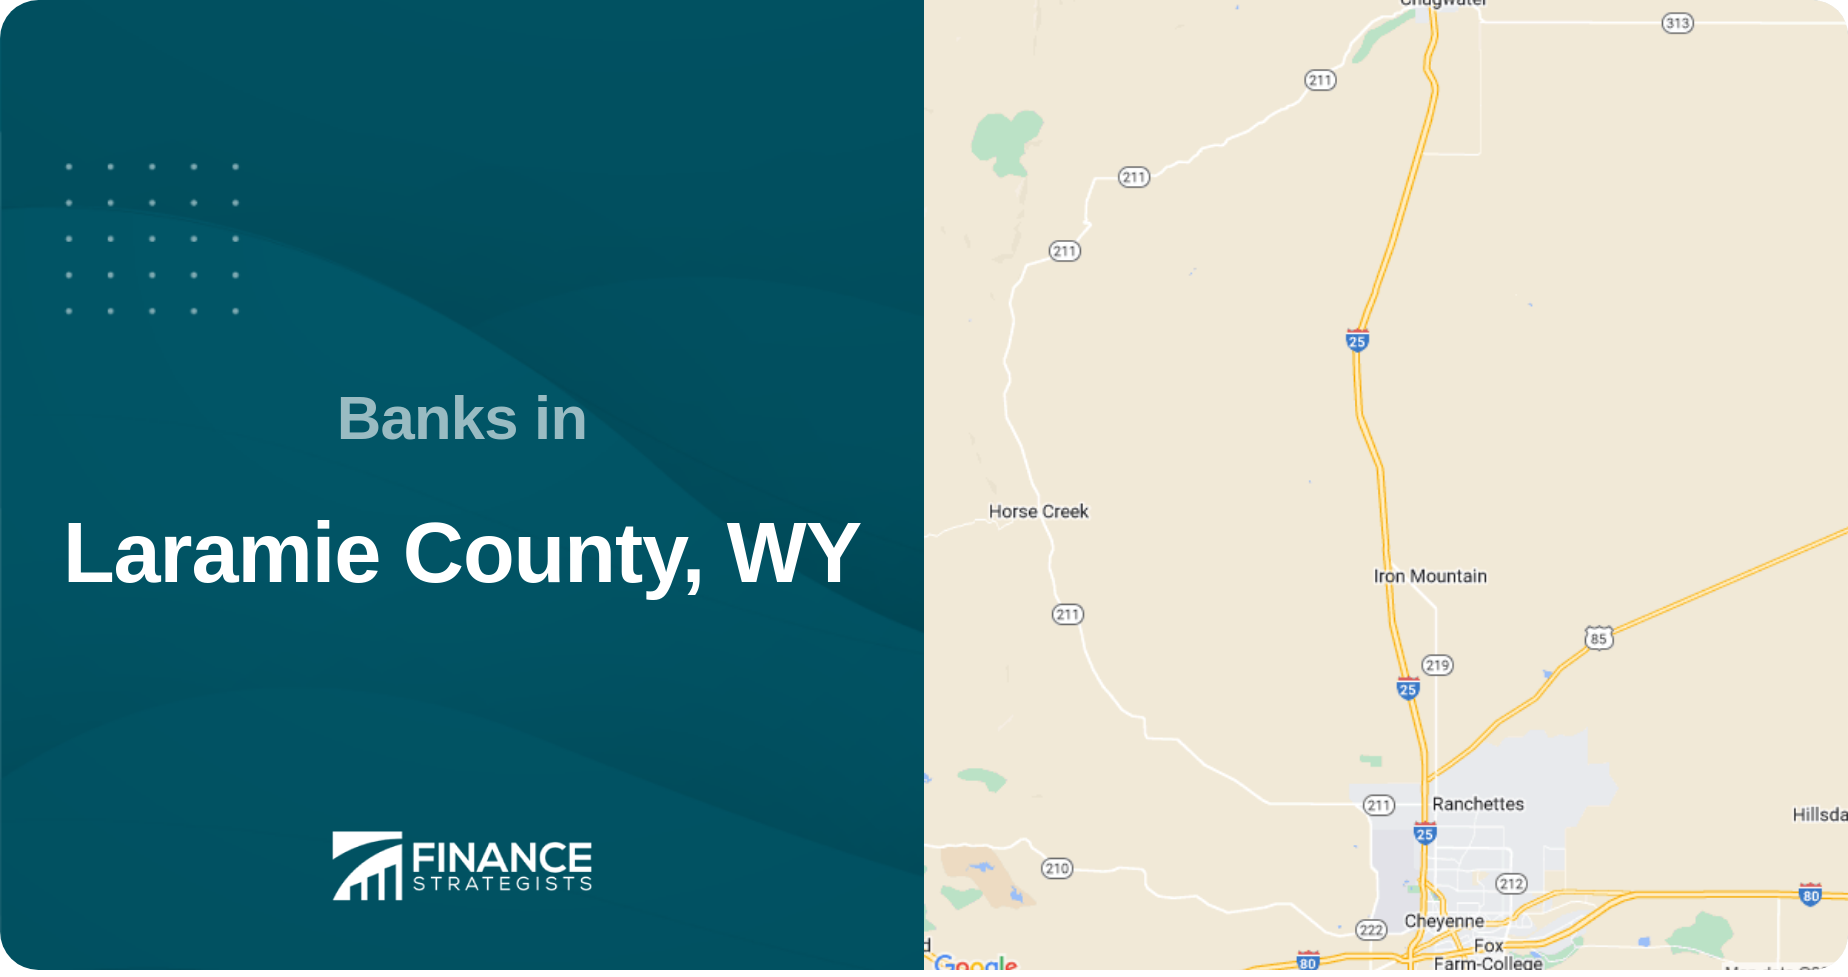 Banks in Laramie County, WY